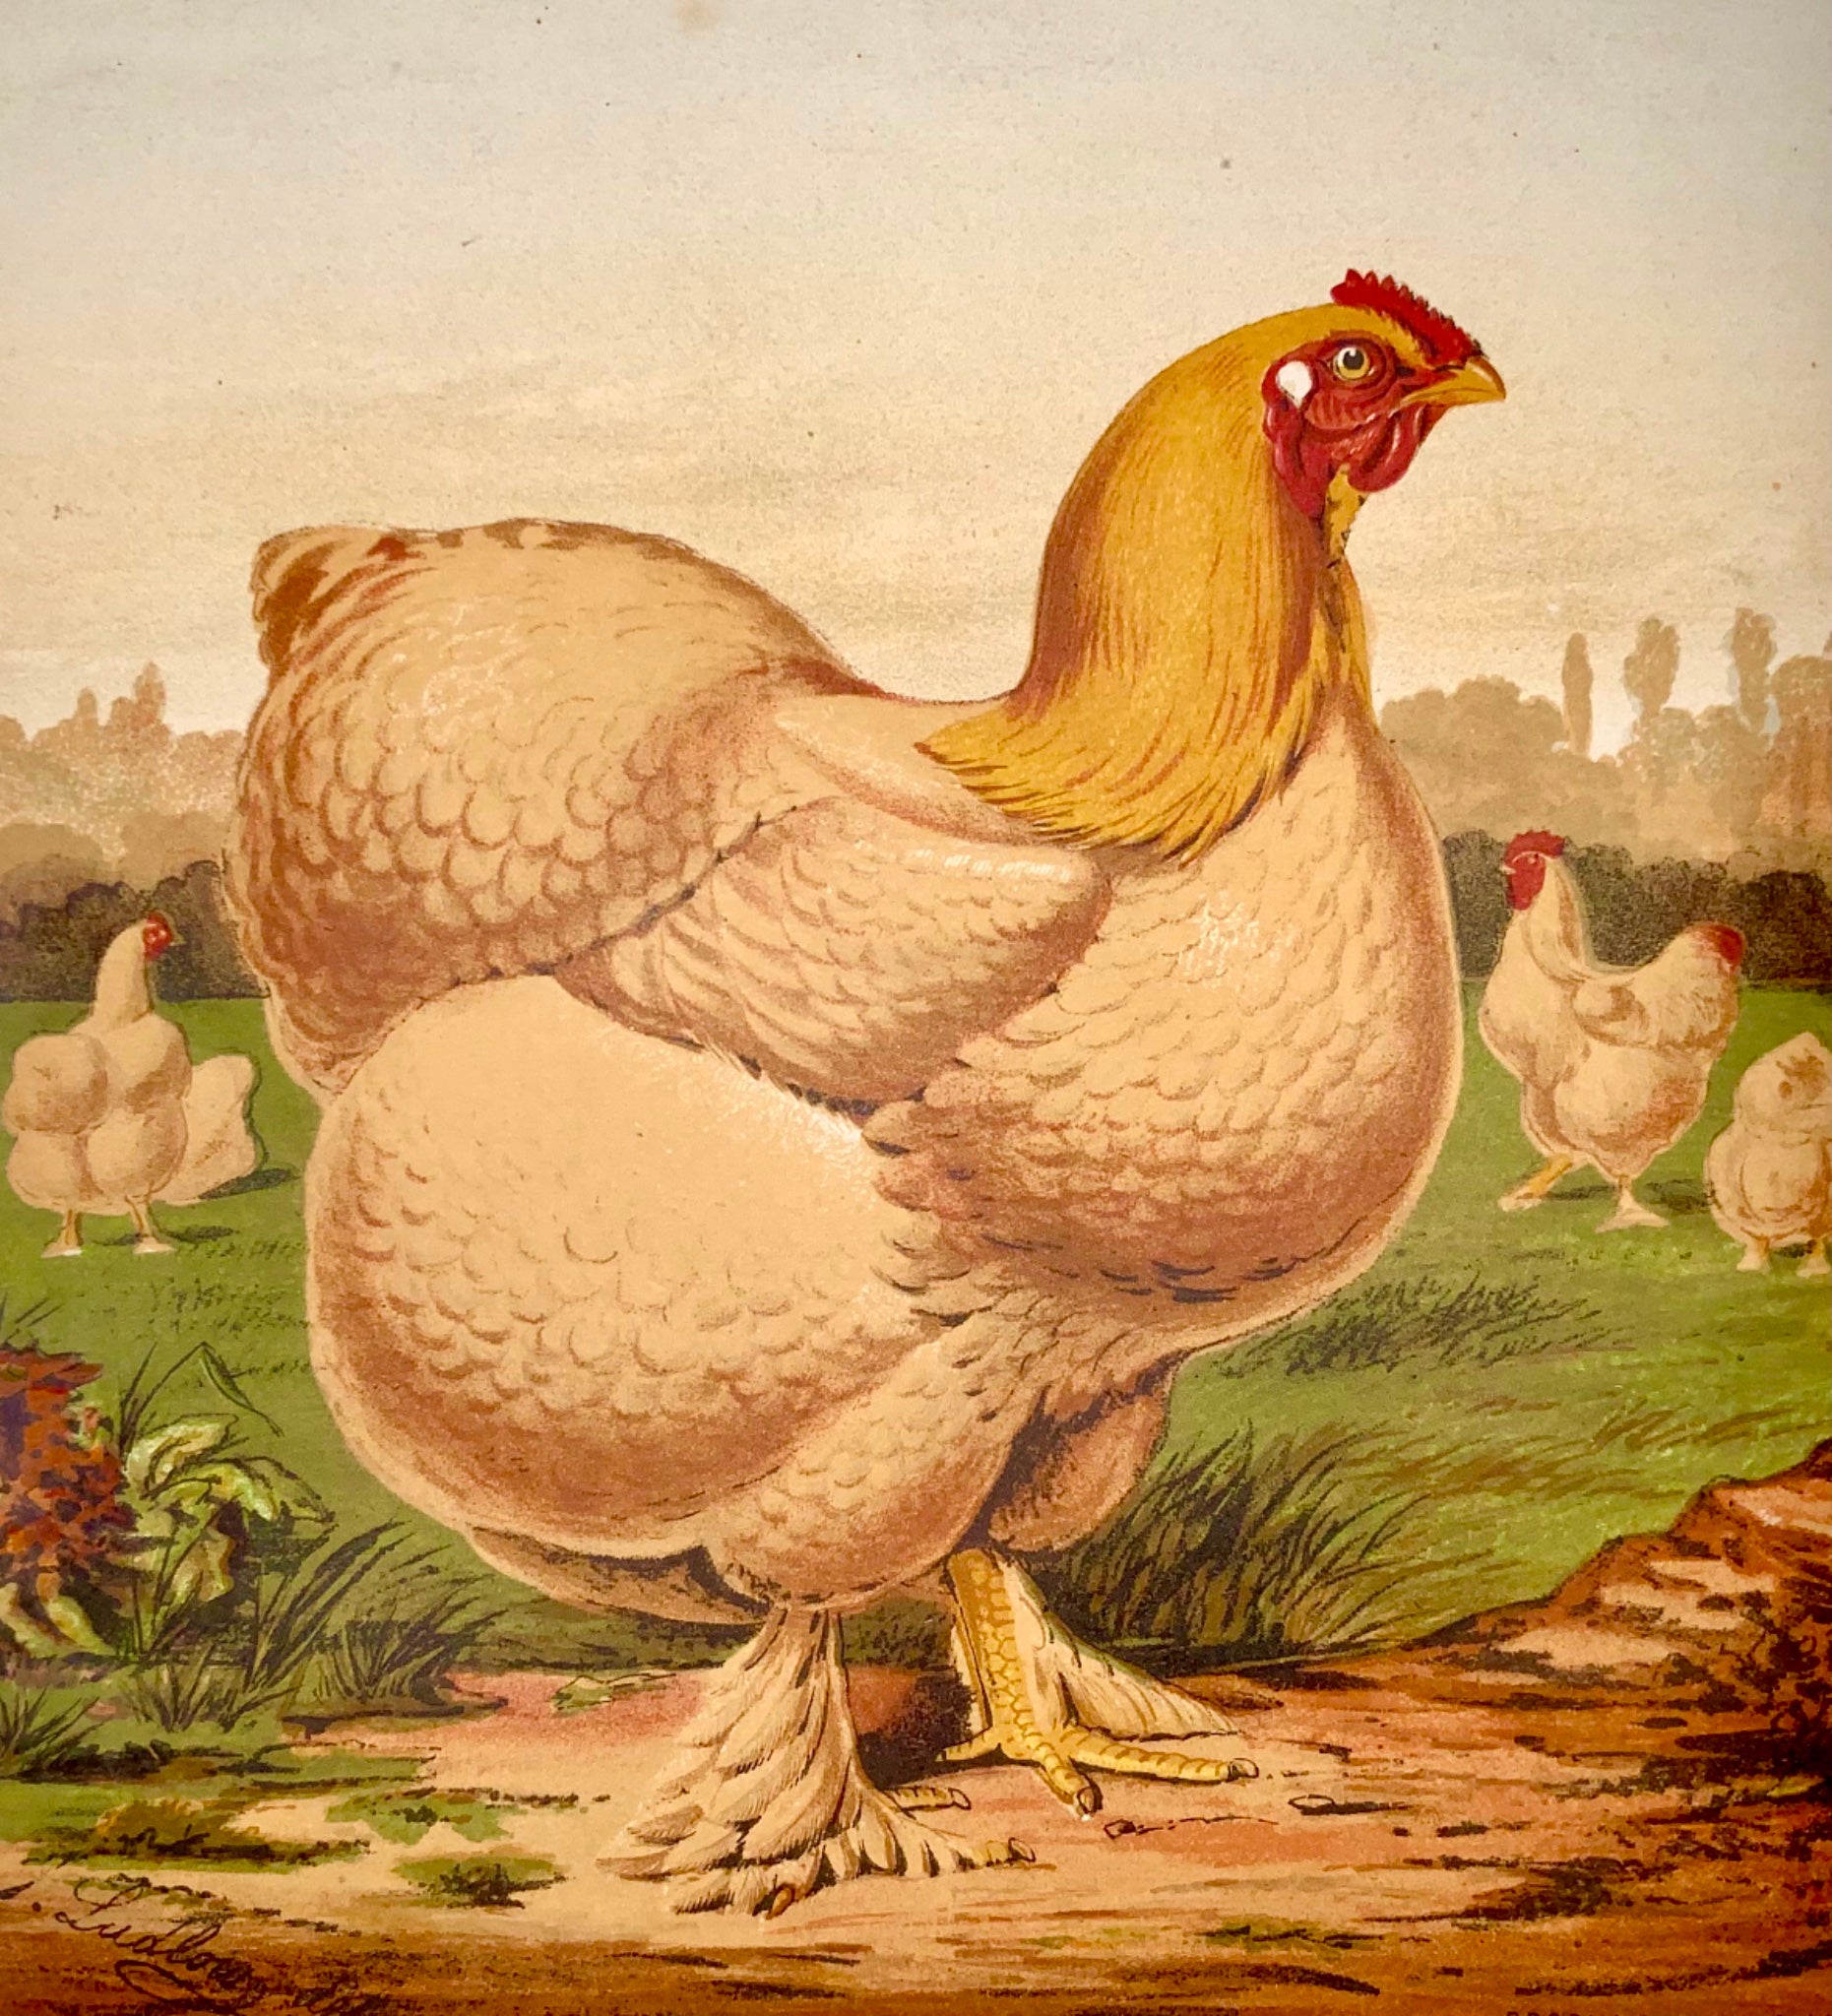 1873 First Issue - Ludlow for Wright COCHIN HEN Poultry quarto chromolithograph - Ornithology